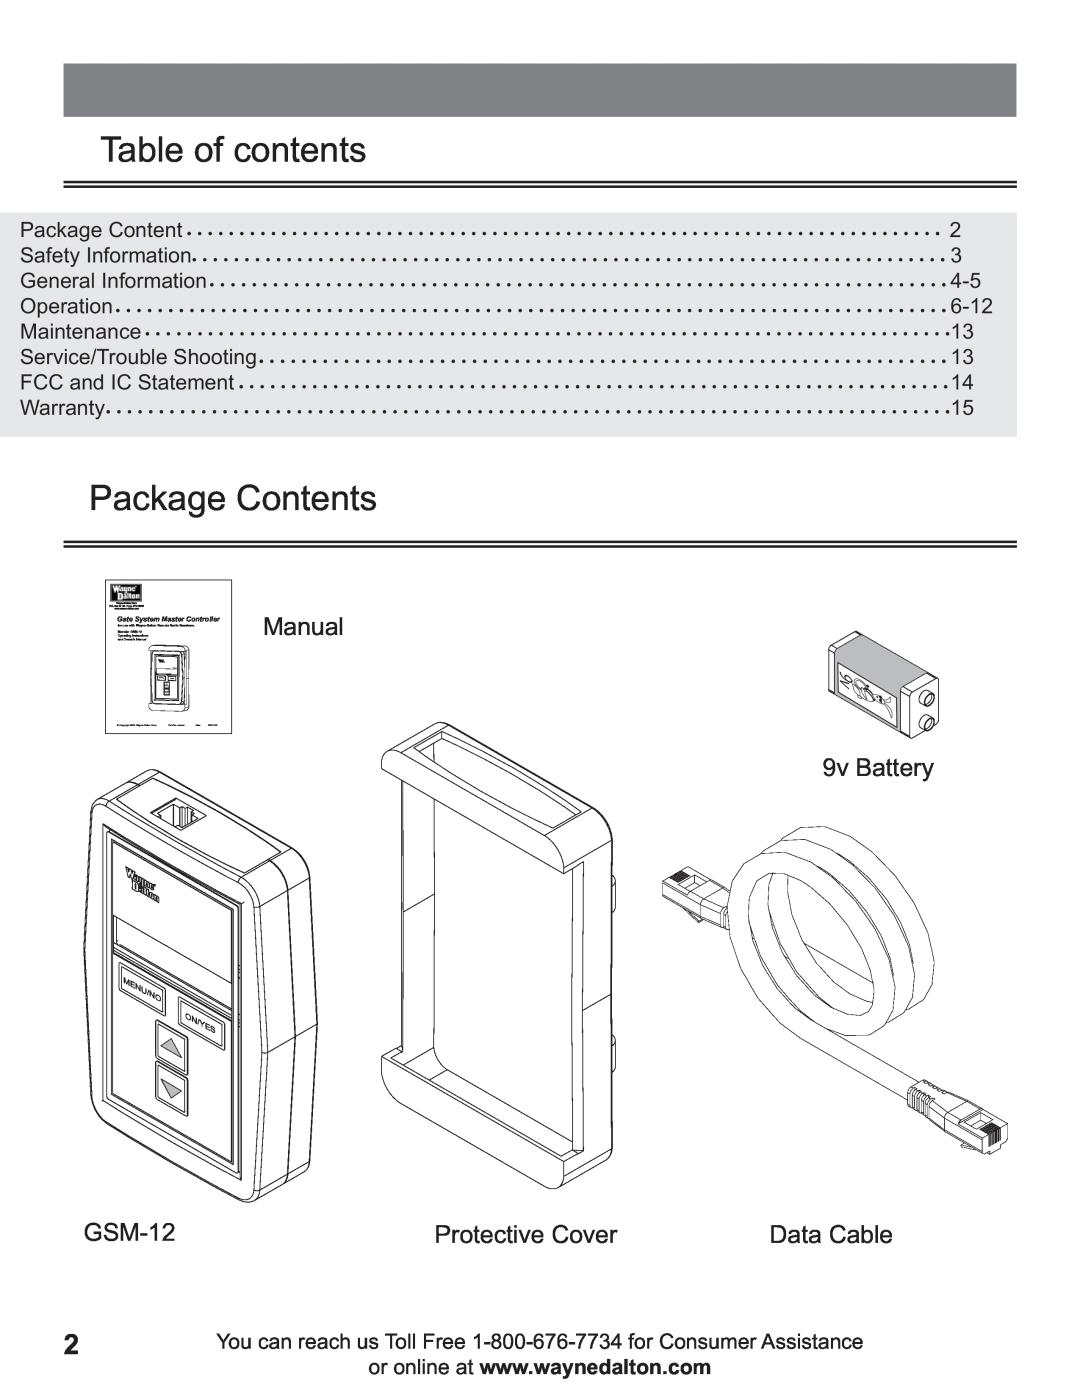 Wayne-Dalton GSM-12 Table of contents, Package Contents, Manual, 9v Battery, Protective Cover, Data Cable 